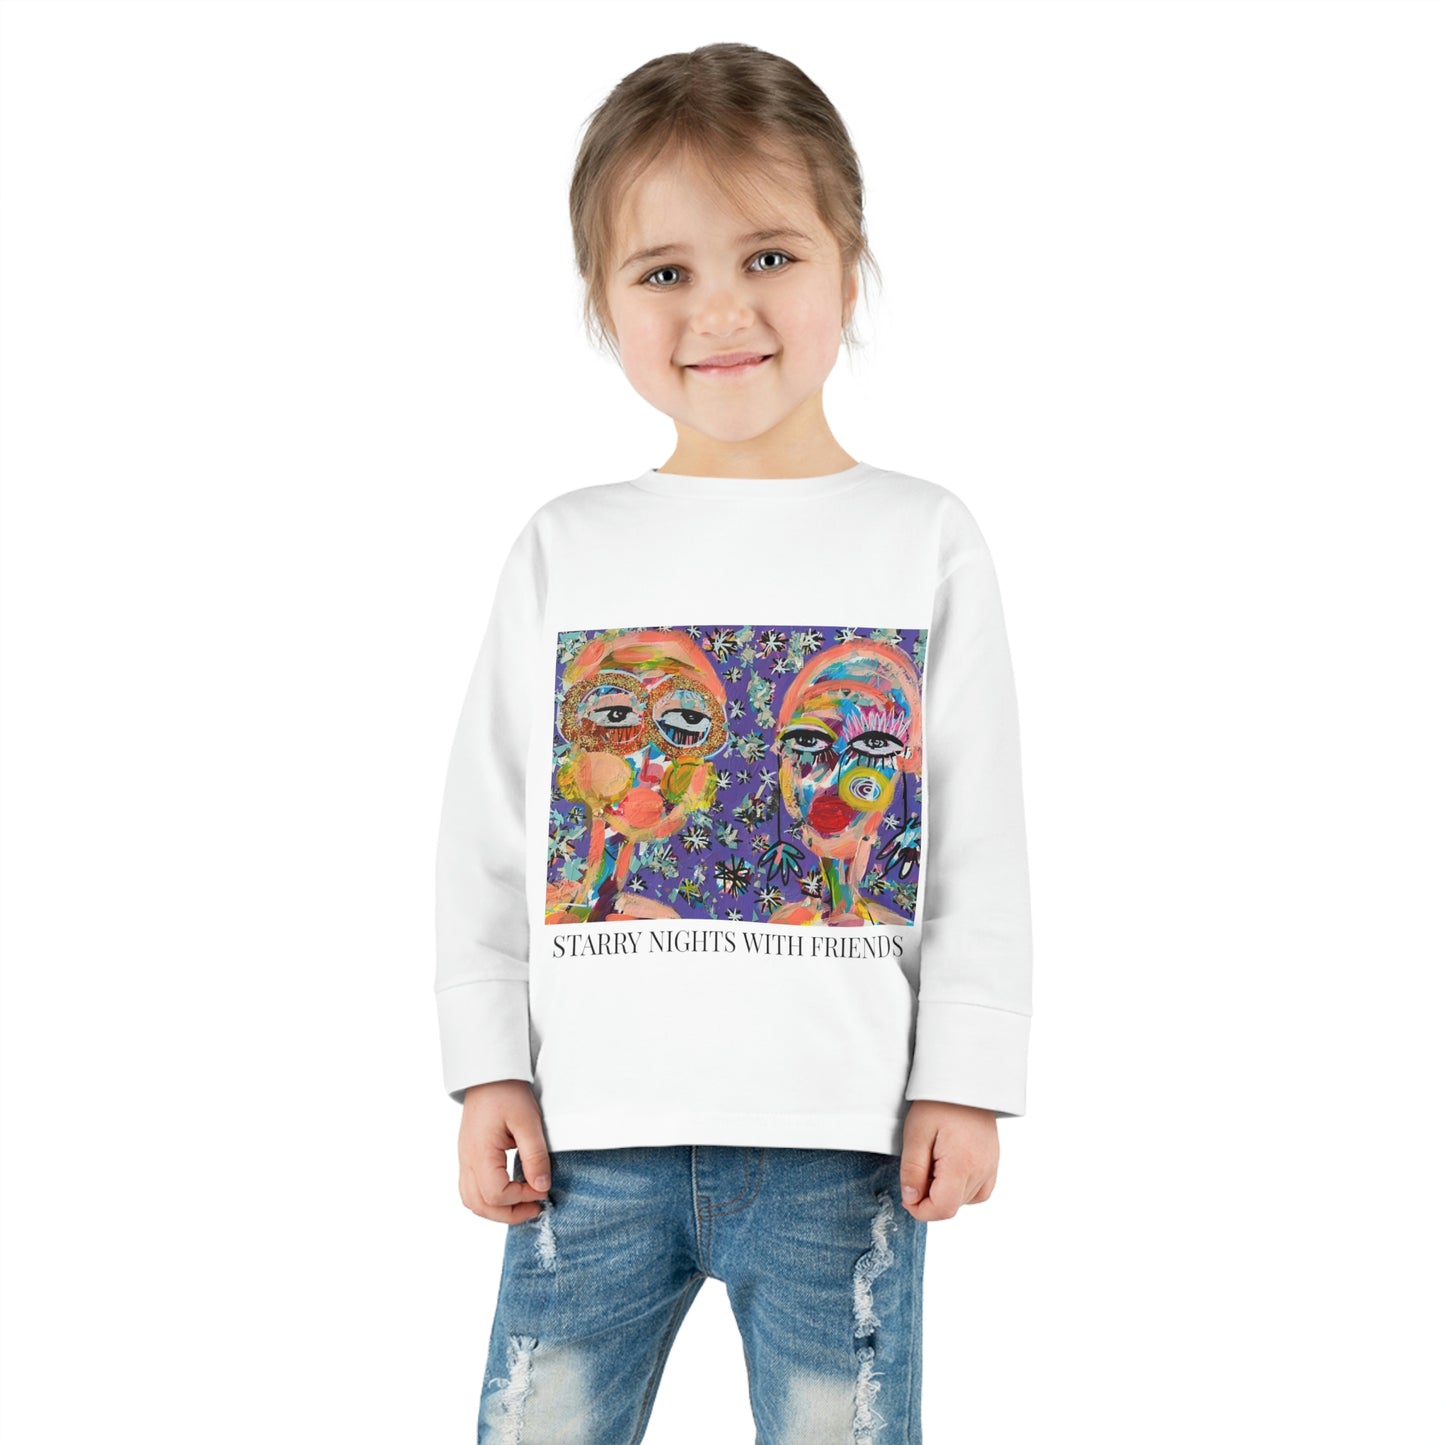 "STARRY NIGHTS WITH FRIENDS"  GIRL TALK ART Toddler Long Sleeve Tee